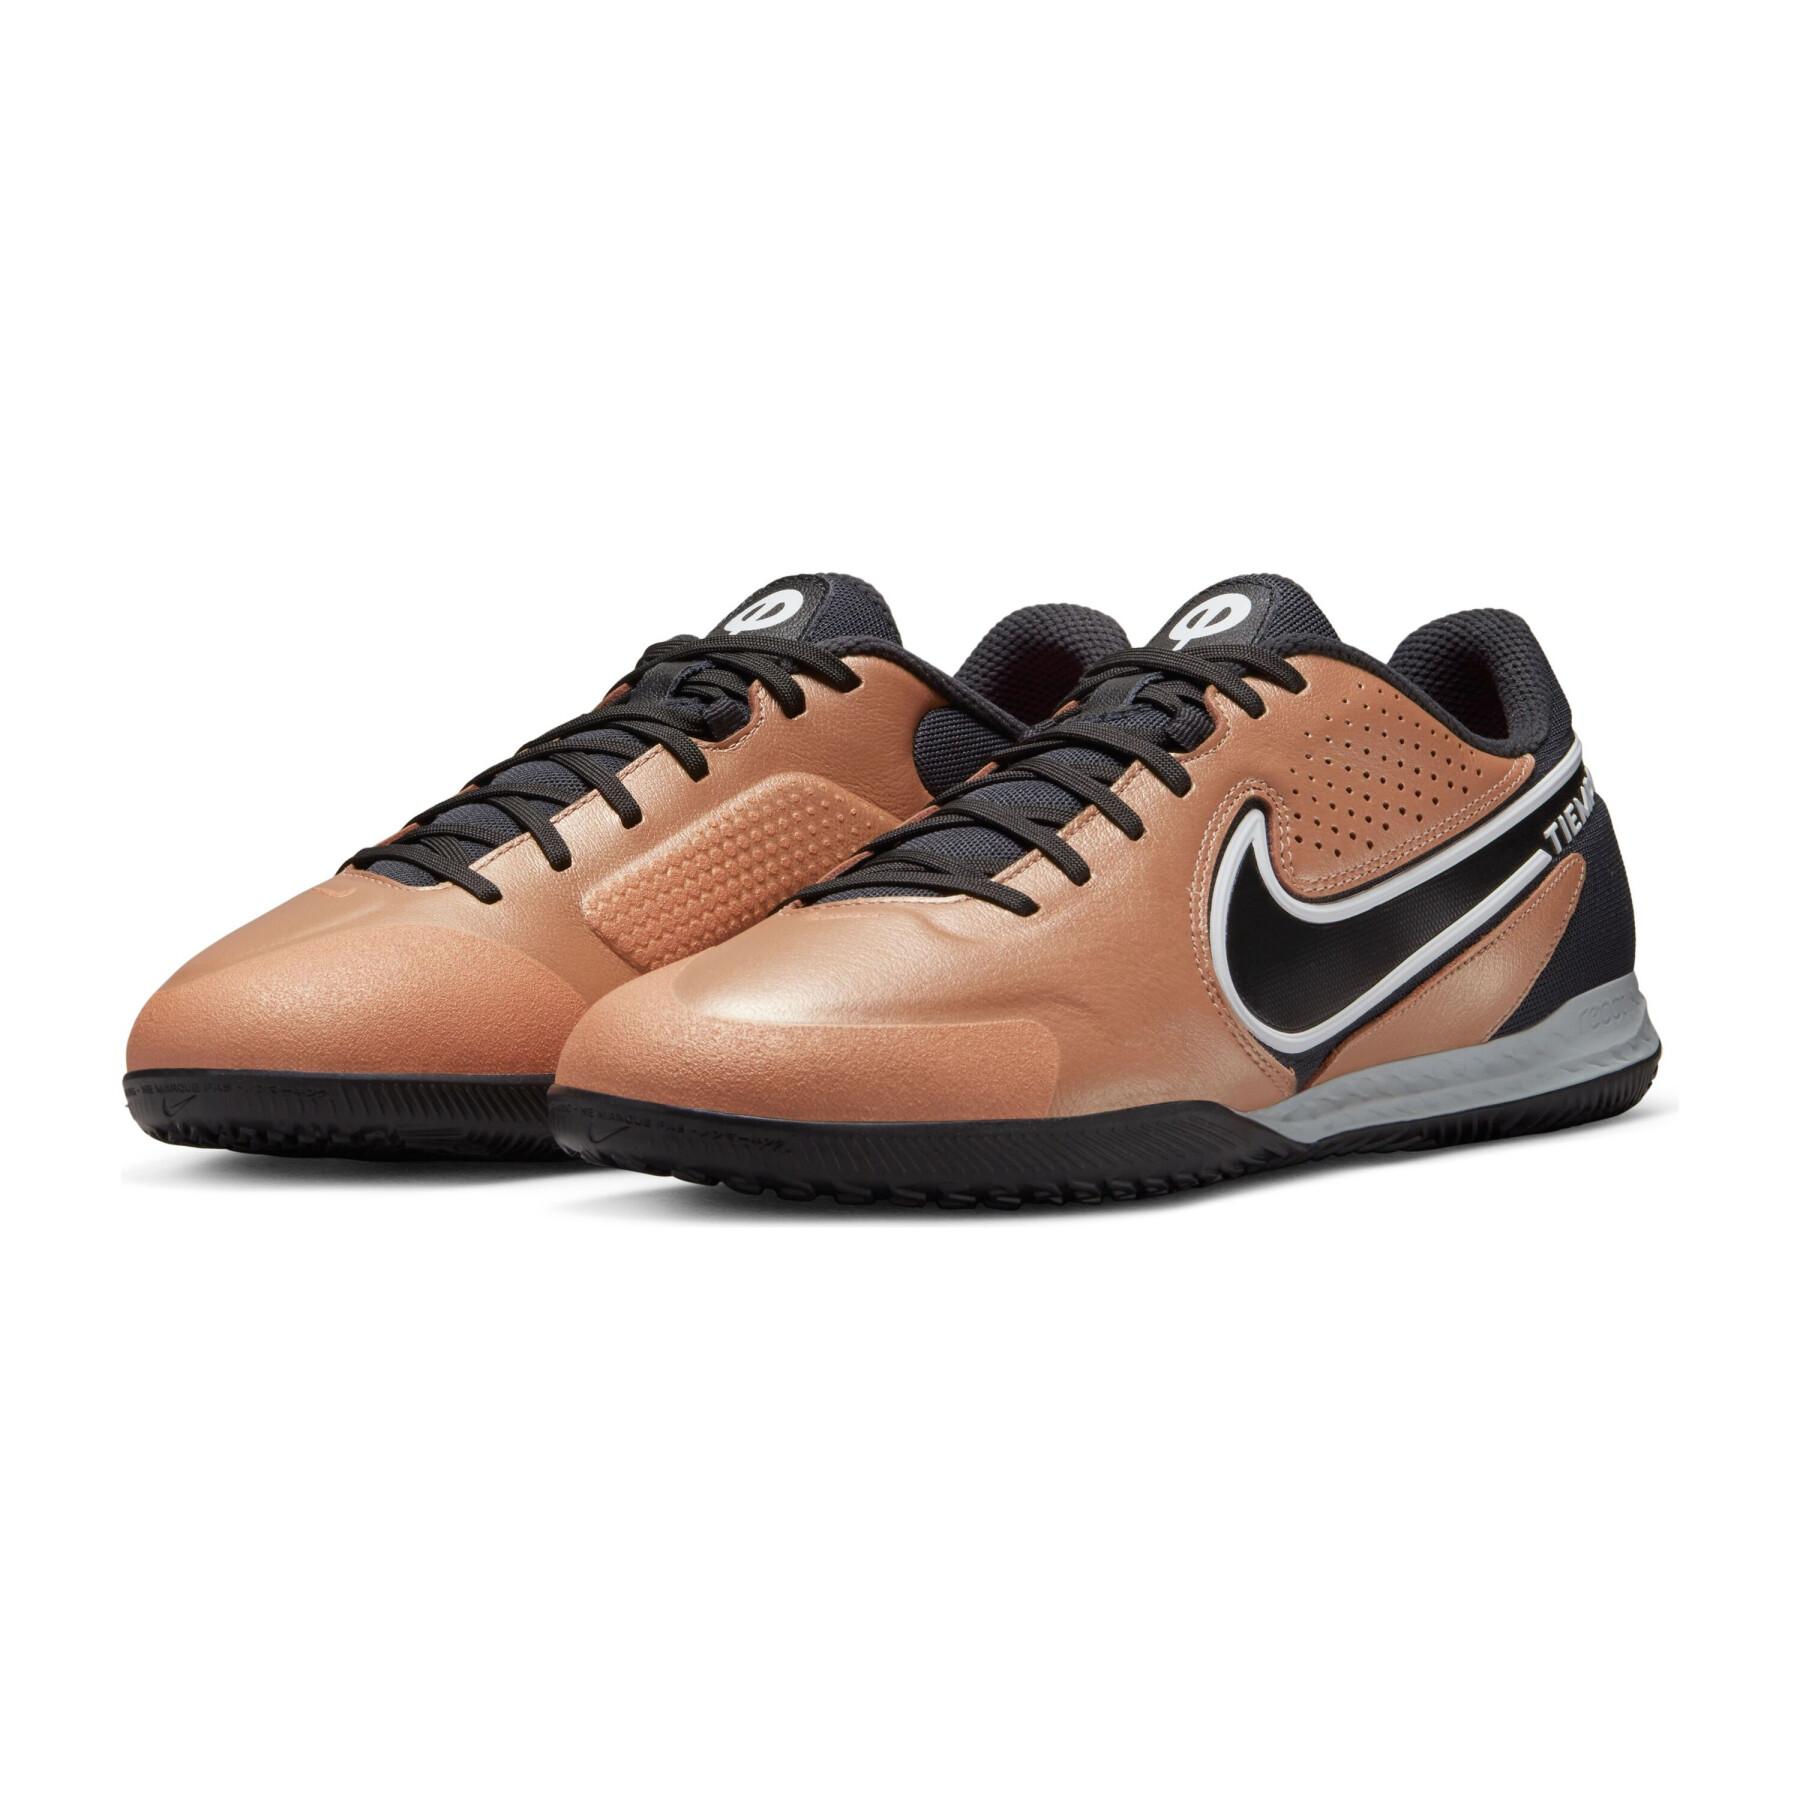 Soccer shoes Nike React Tiempo Legend 9 Pro IC - Generation Pack